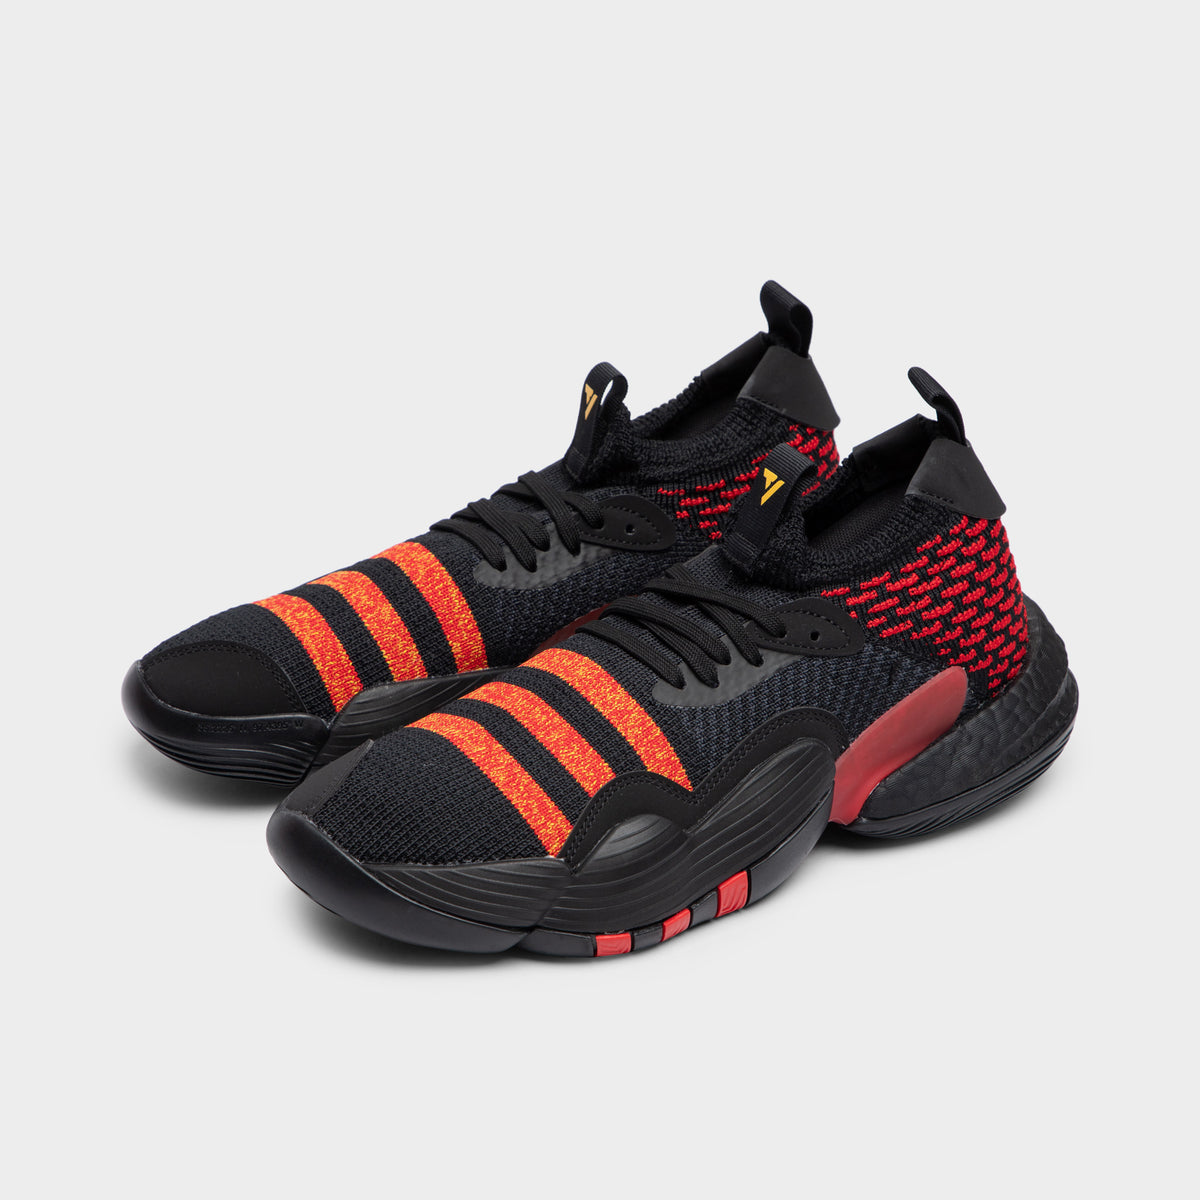 adidas Trae Young 2.0 Core Black / Better Scarlet - Bold Gold | JD Sports